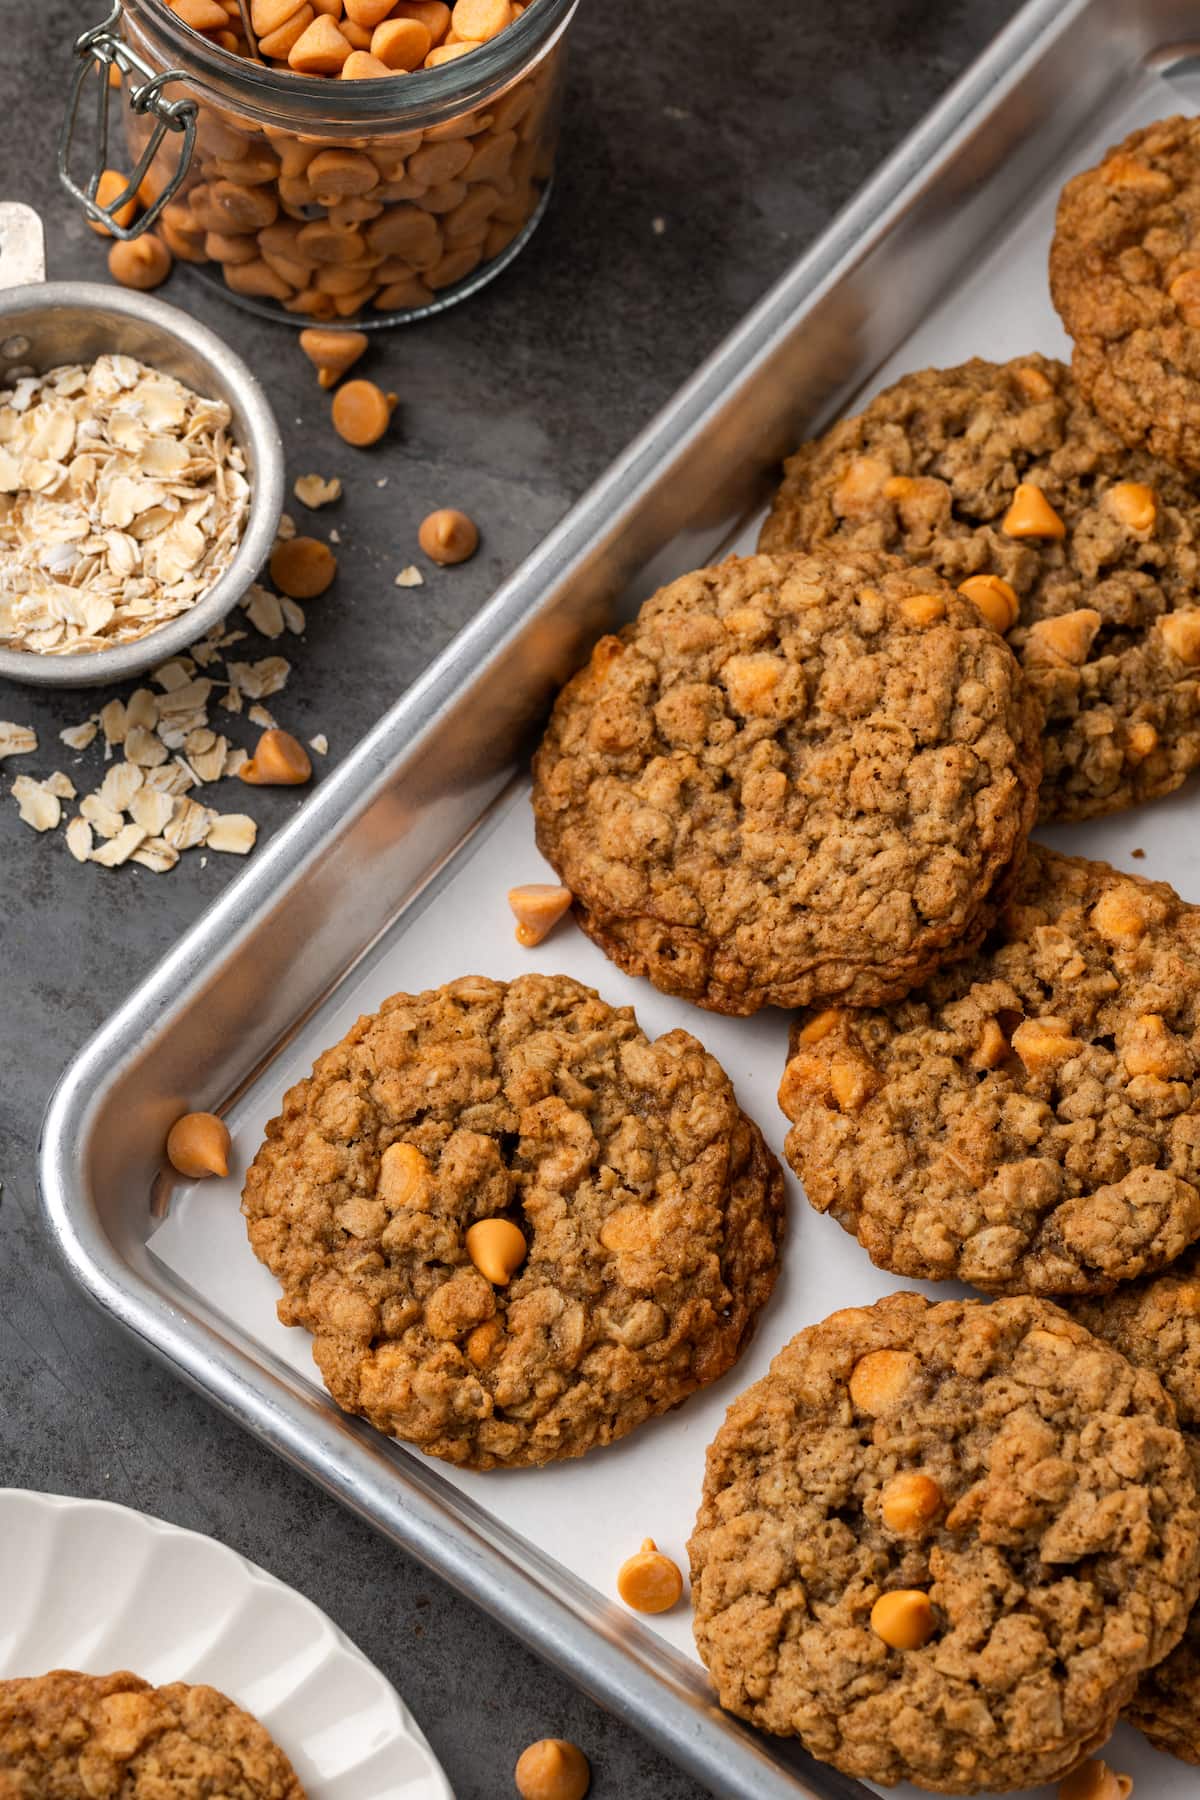 Assorted oatmeal butterscotch cookies on a baking sheet, next to small bowls of oats and butterscotch chips.